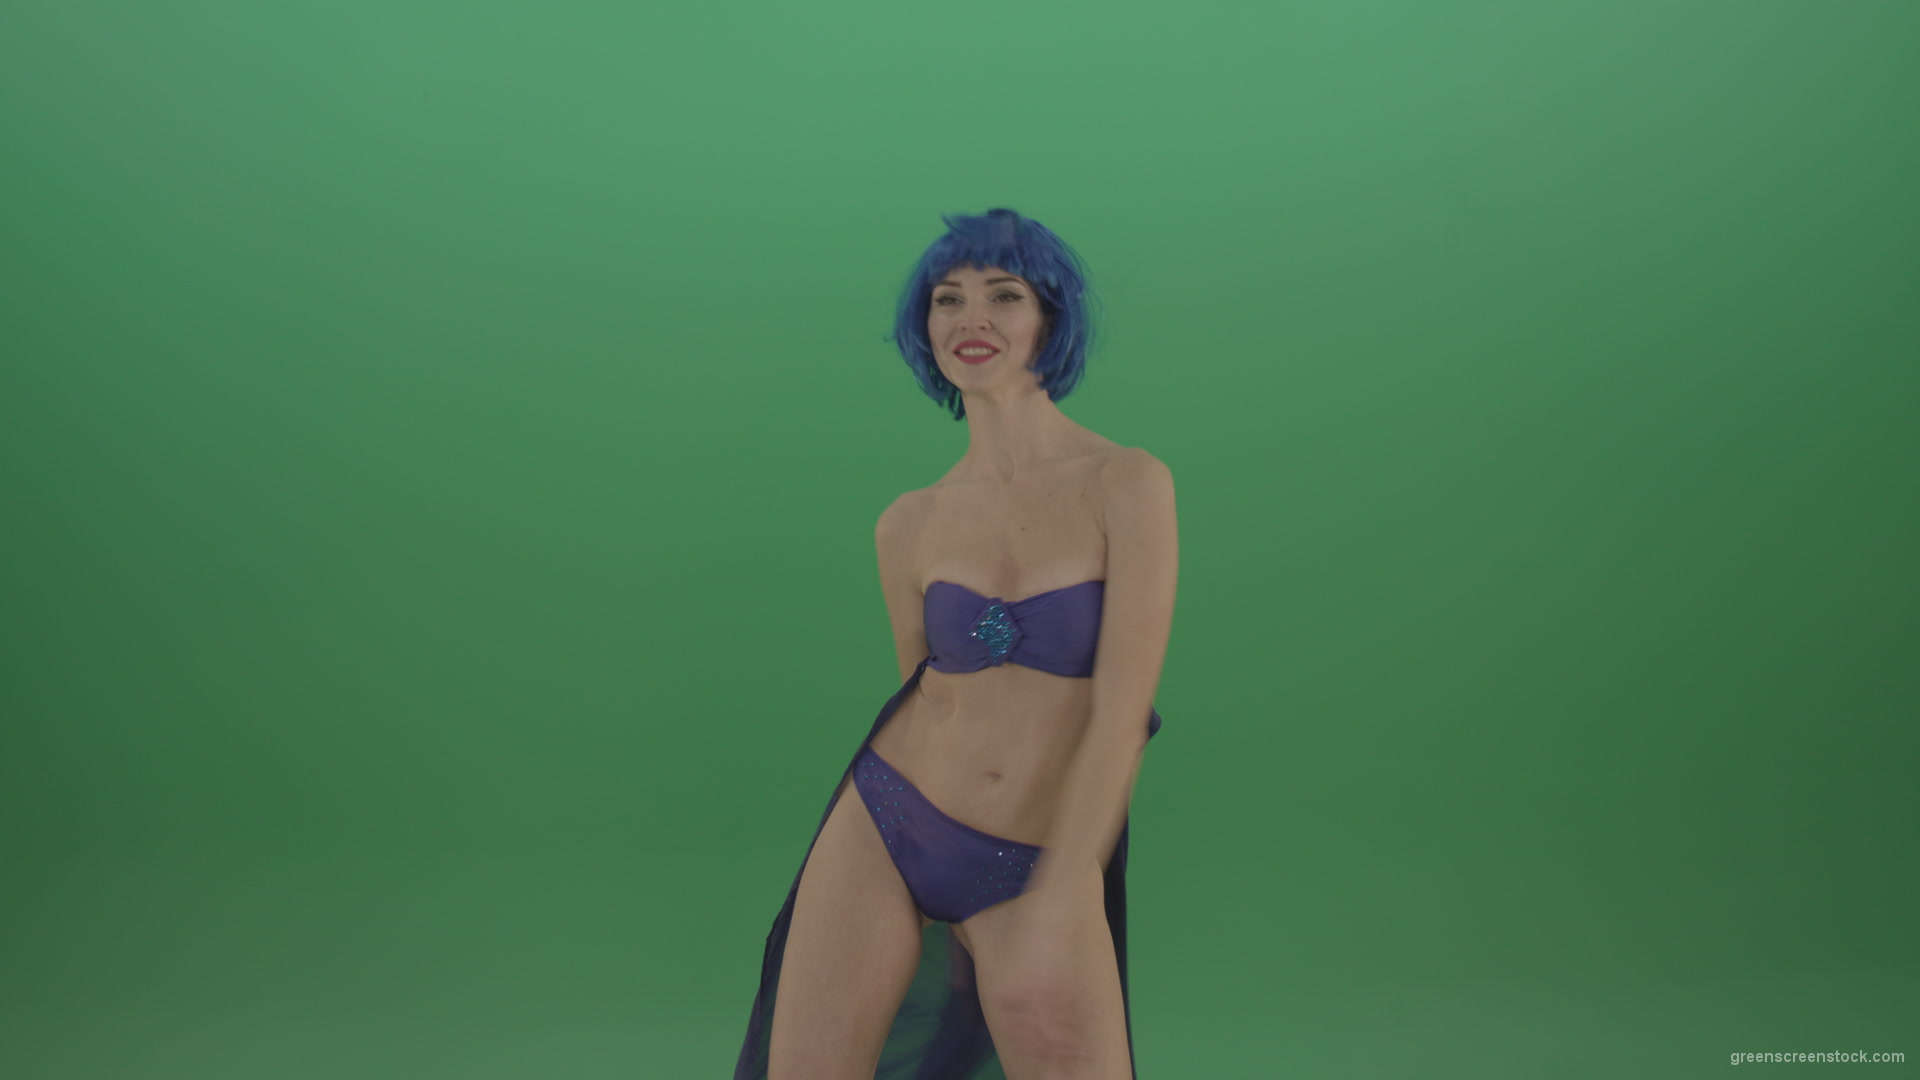 Blue Hair Girl Dancing Sexy Strip Isolated On Green Background Green